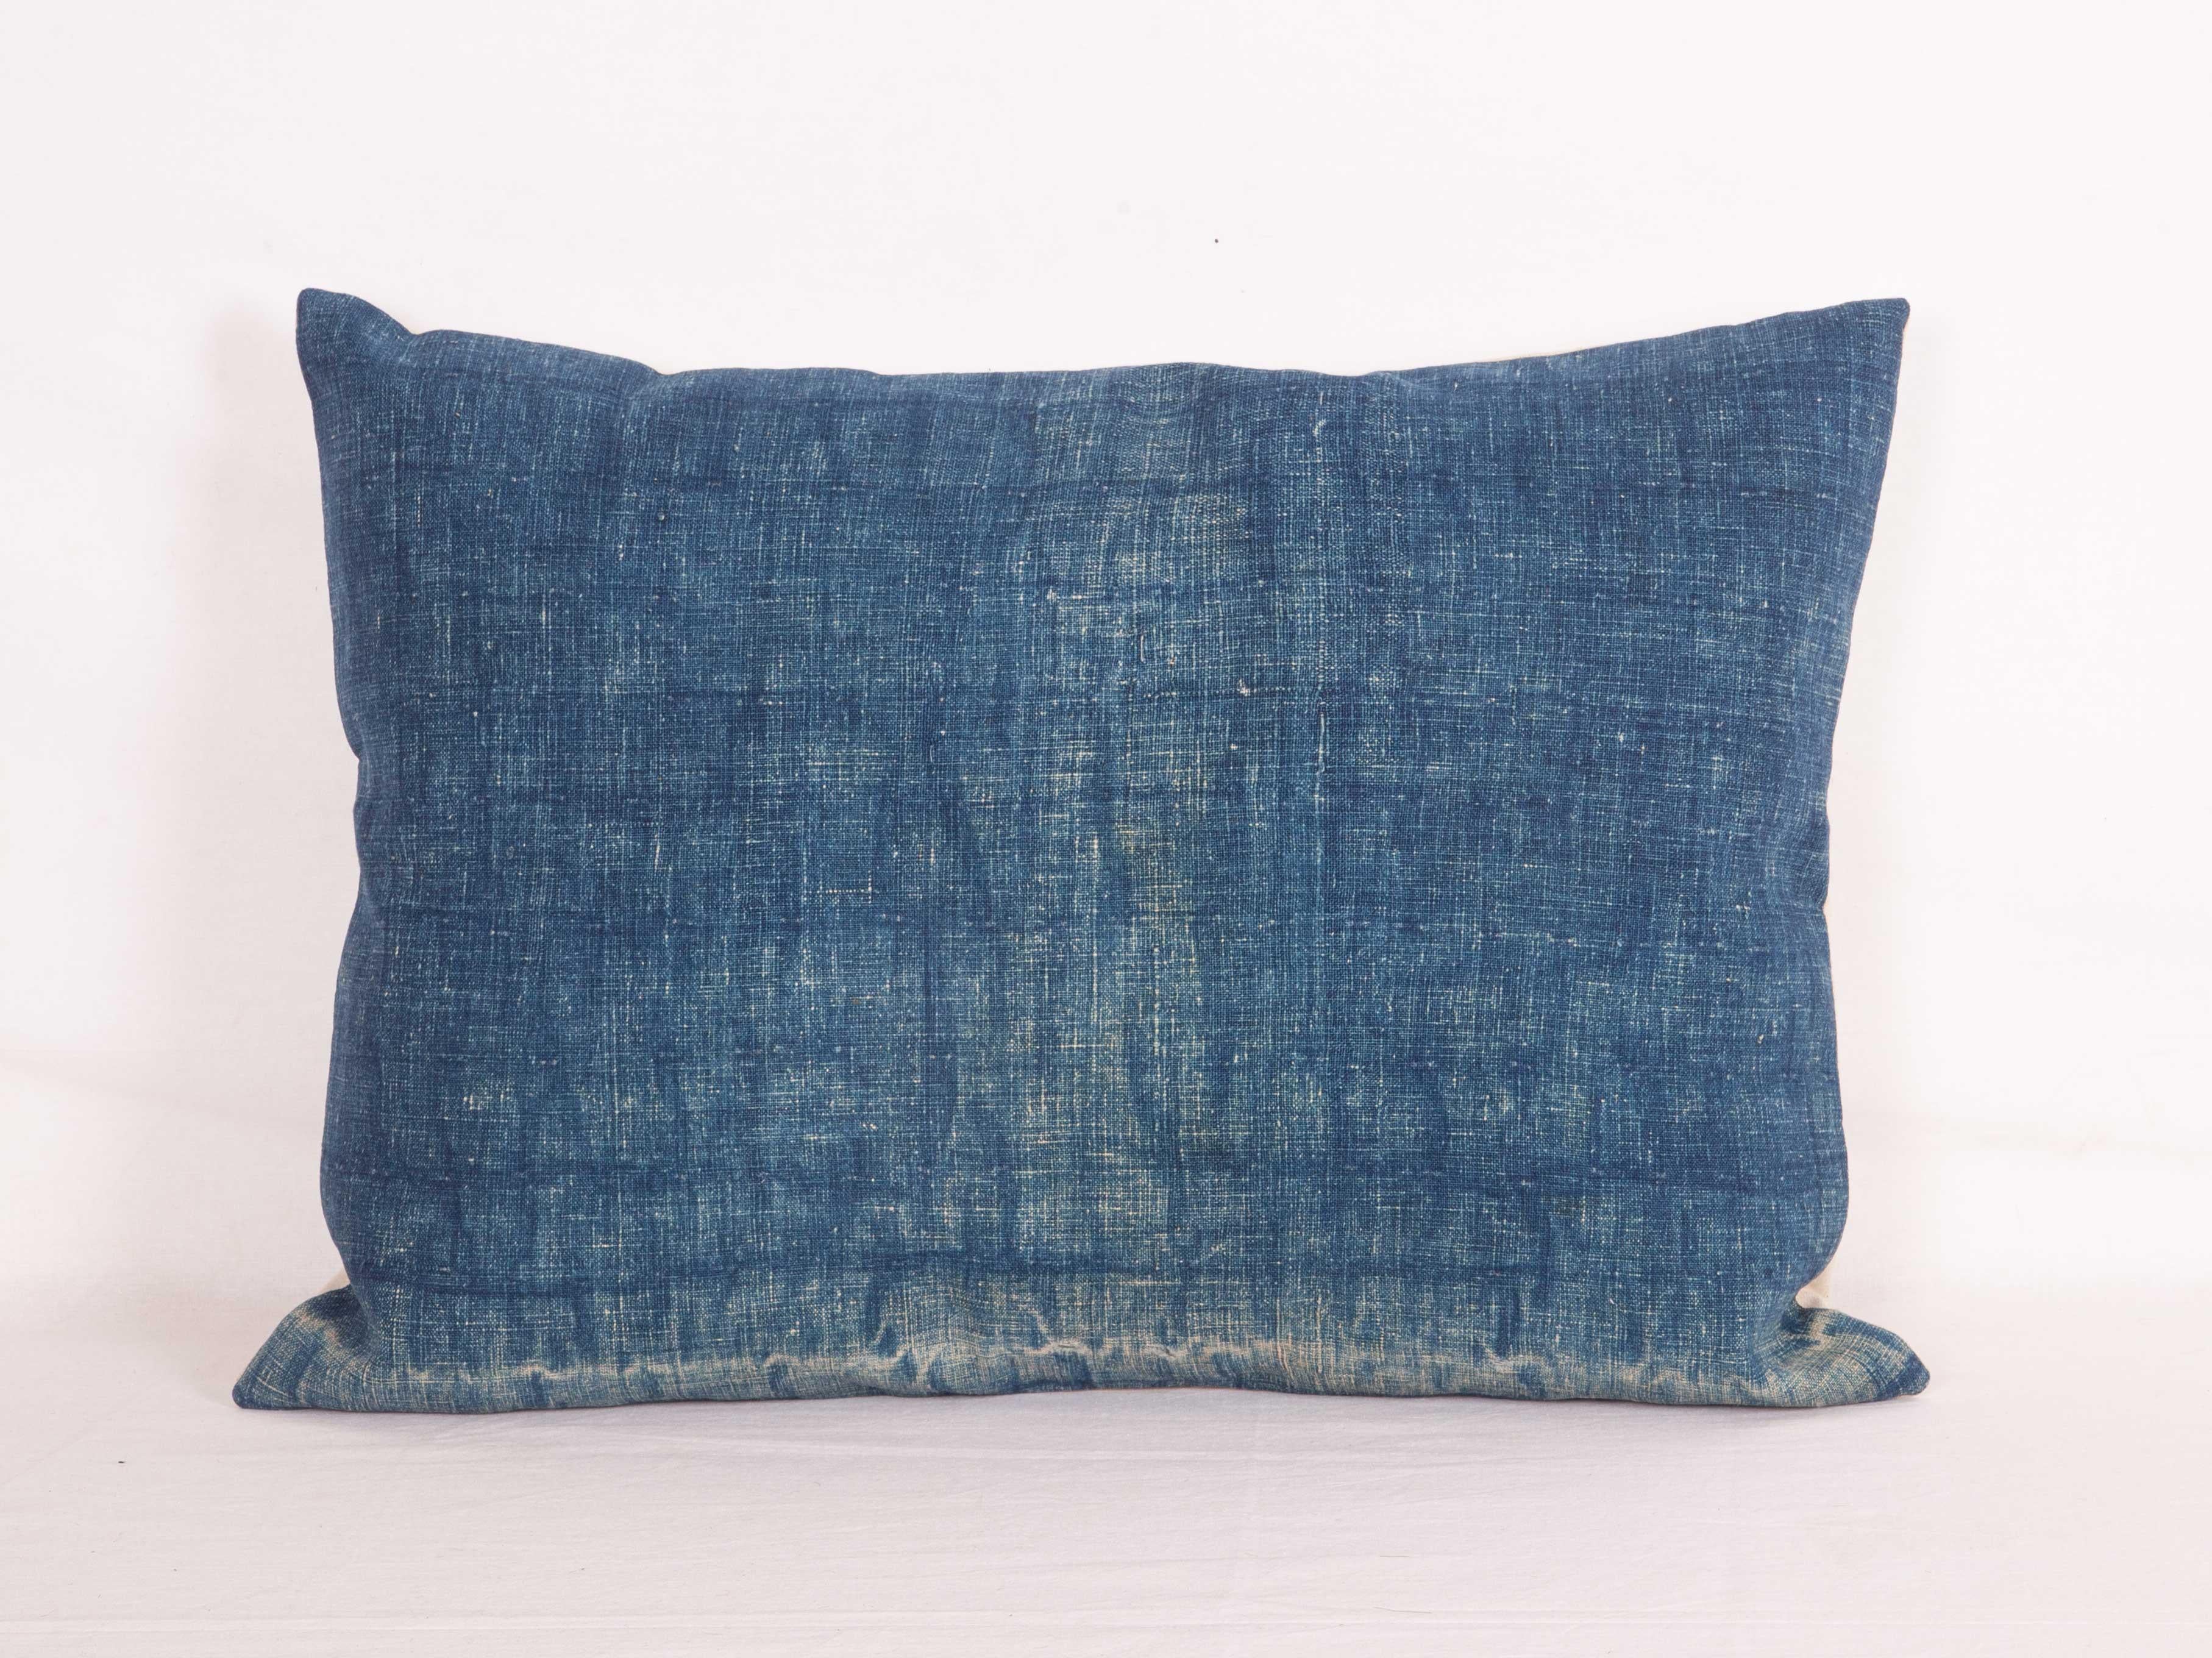 Tribal Indigo Pillow Cases Fashioned from an Early 20th Century Anatılian Quilt Top